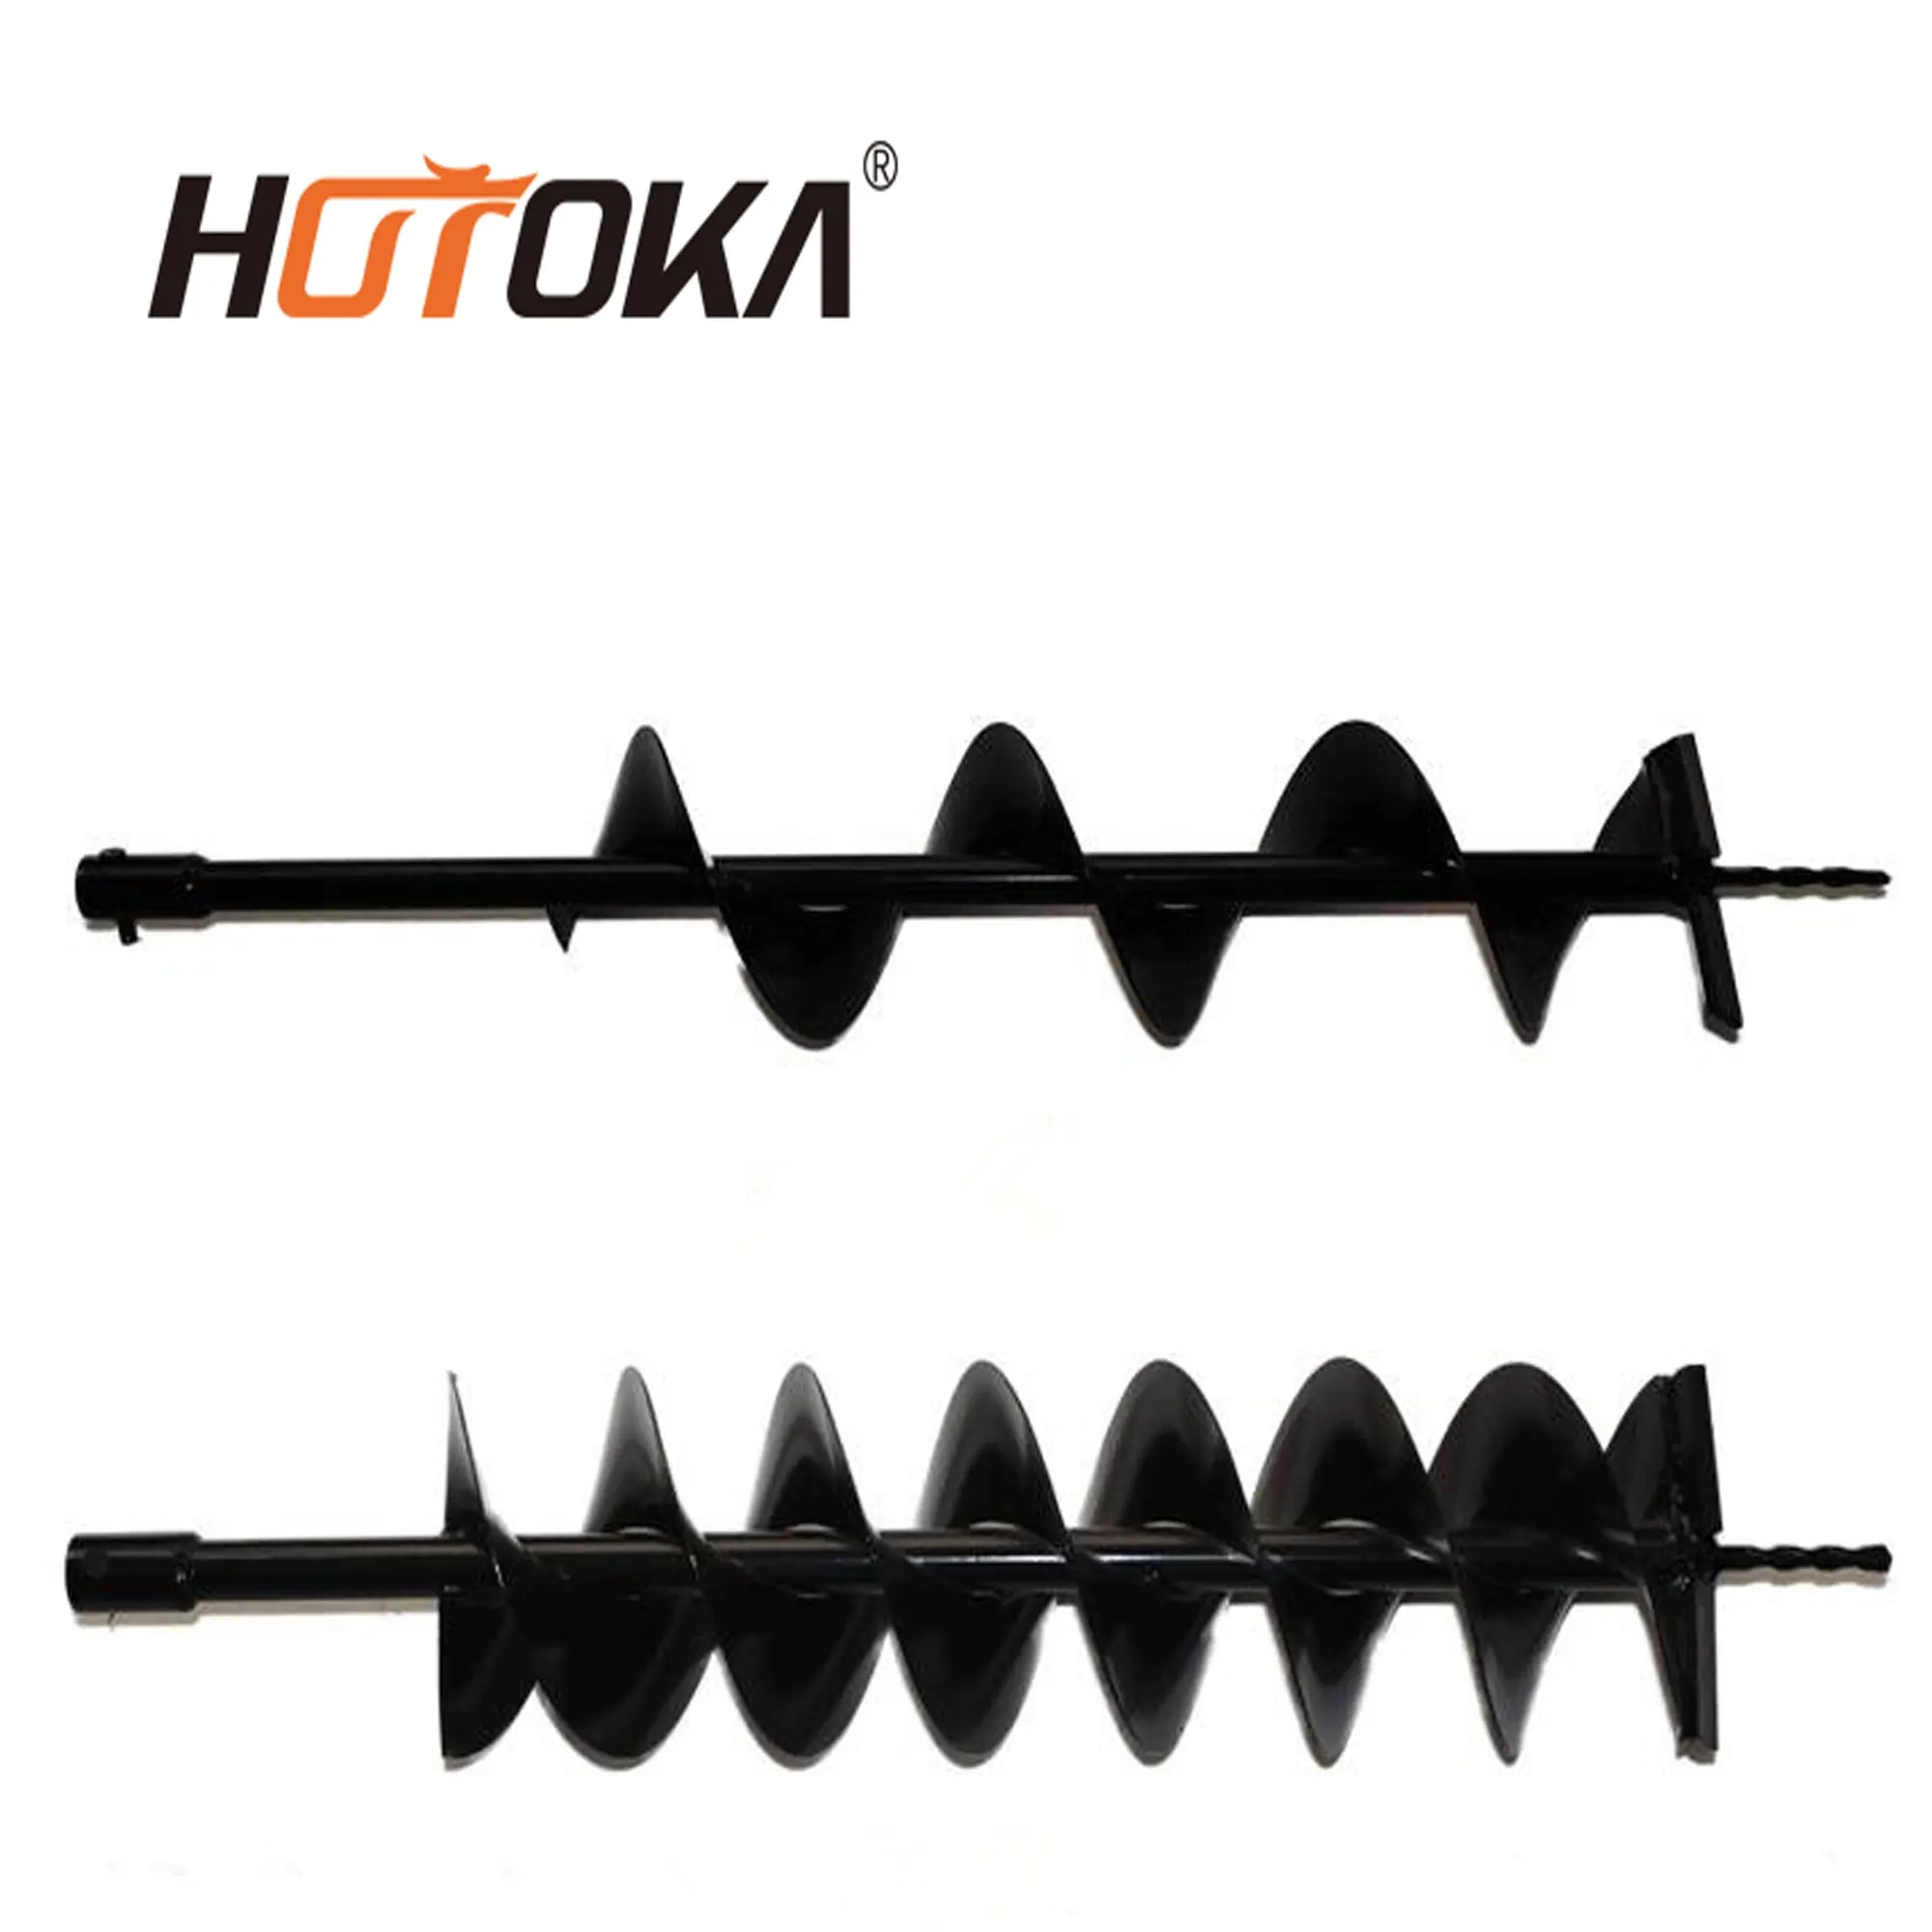 2022 hot sale good 6 inch ground 150mm without drill earth auger drill bits